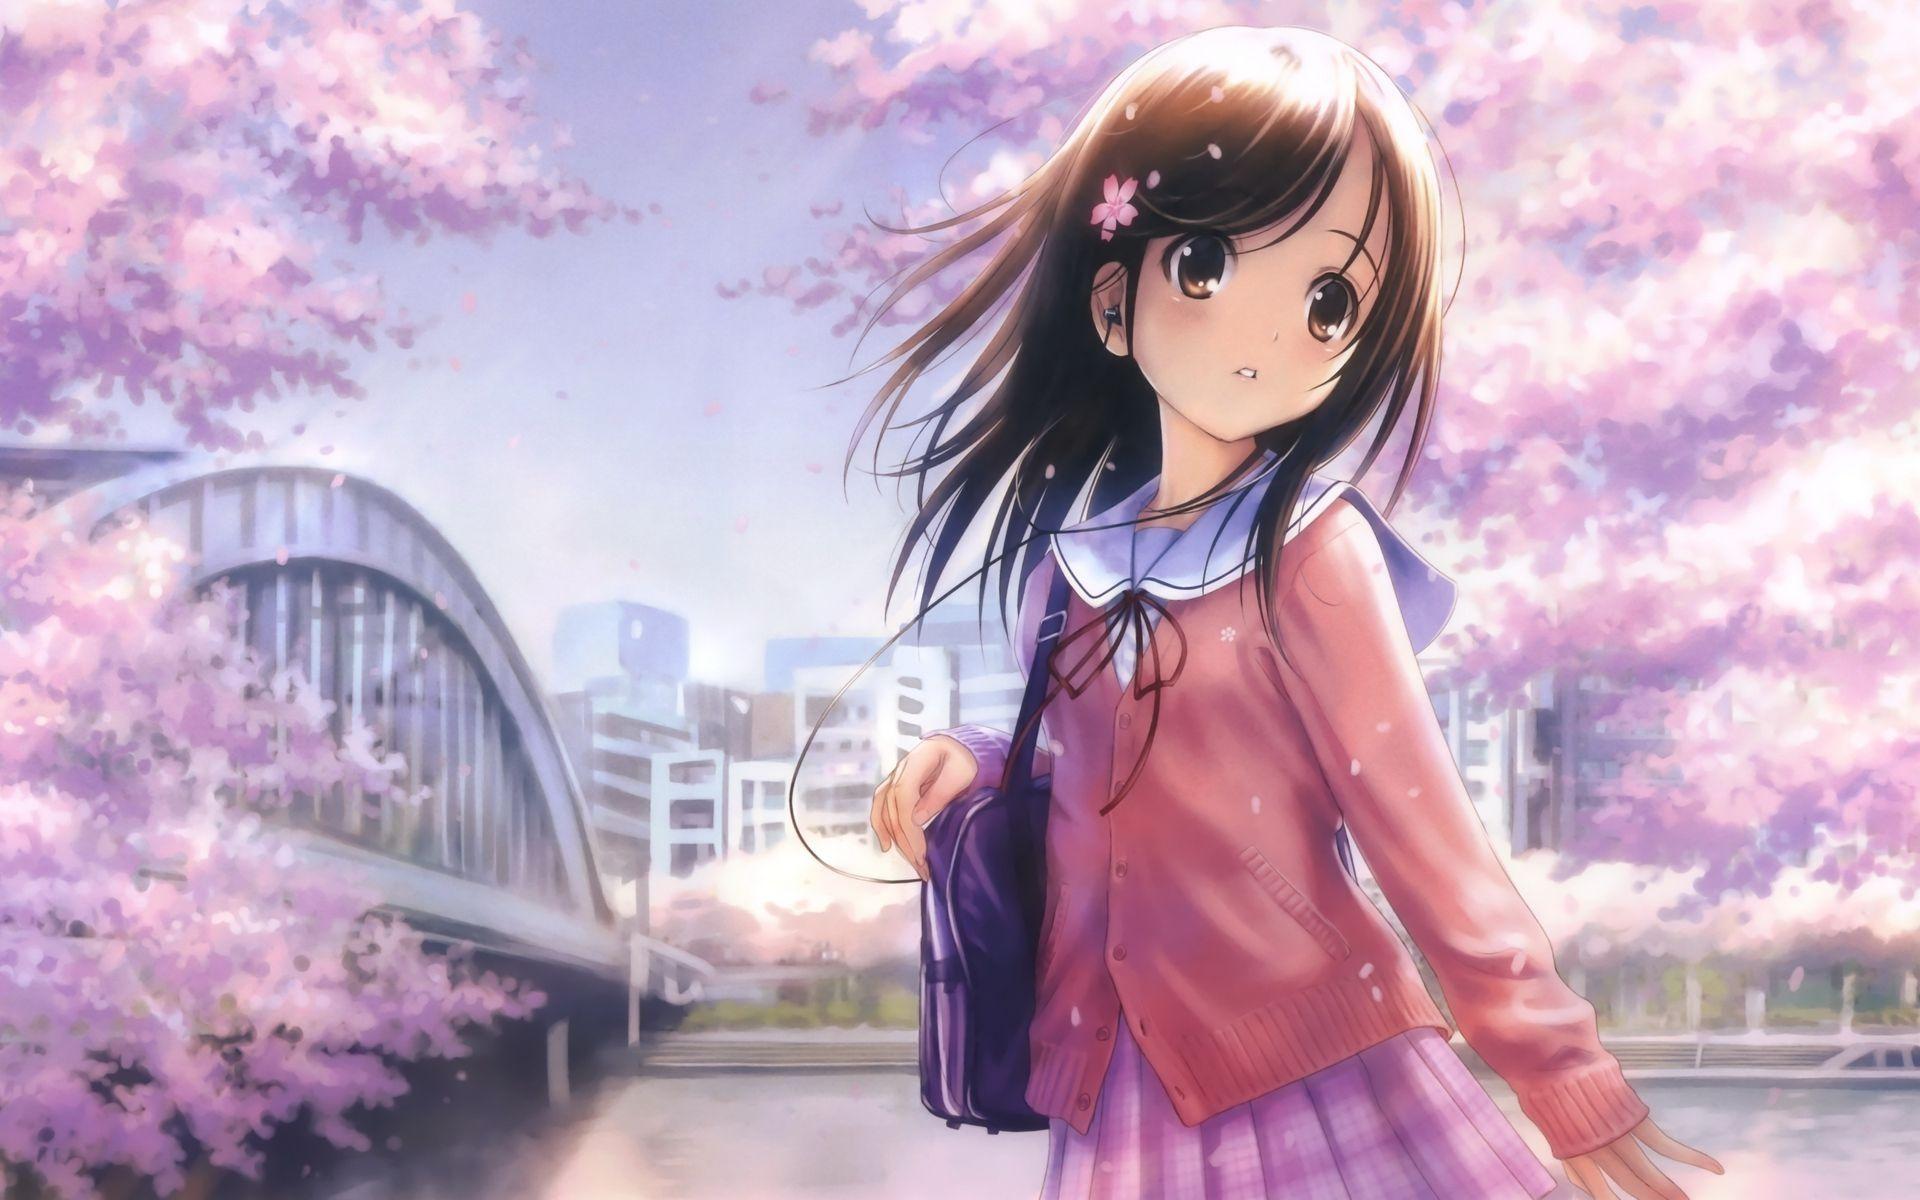 Lonely Anime Girl Wallpapers - Top Free Lonely Anime Girl ...